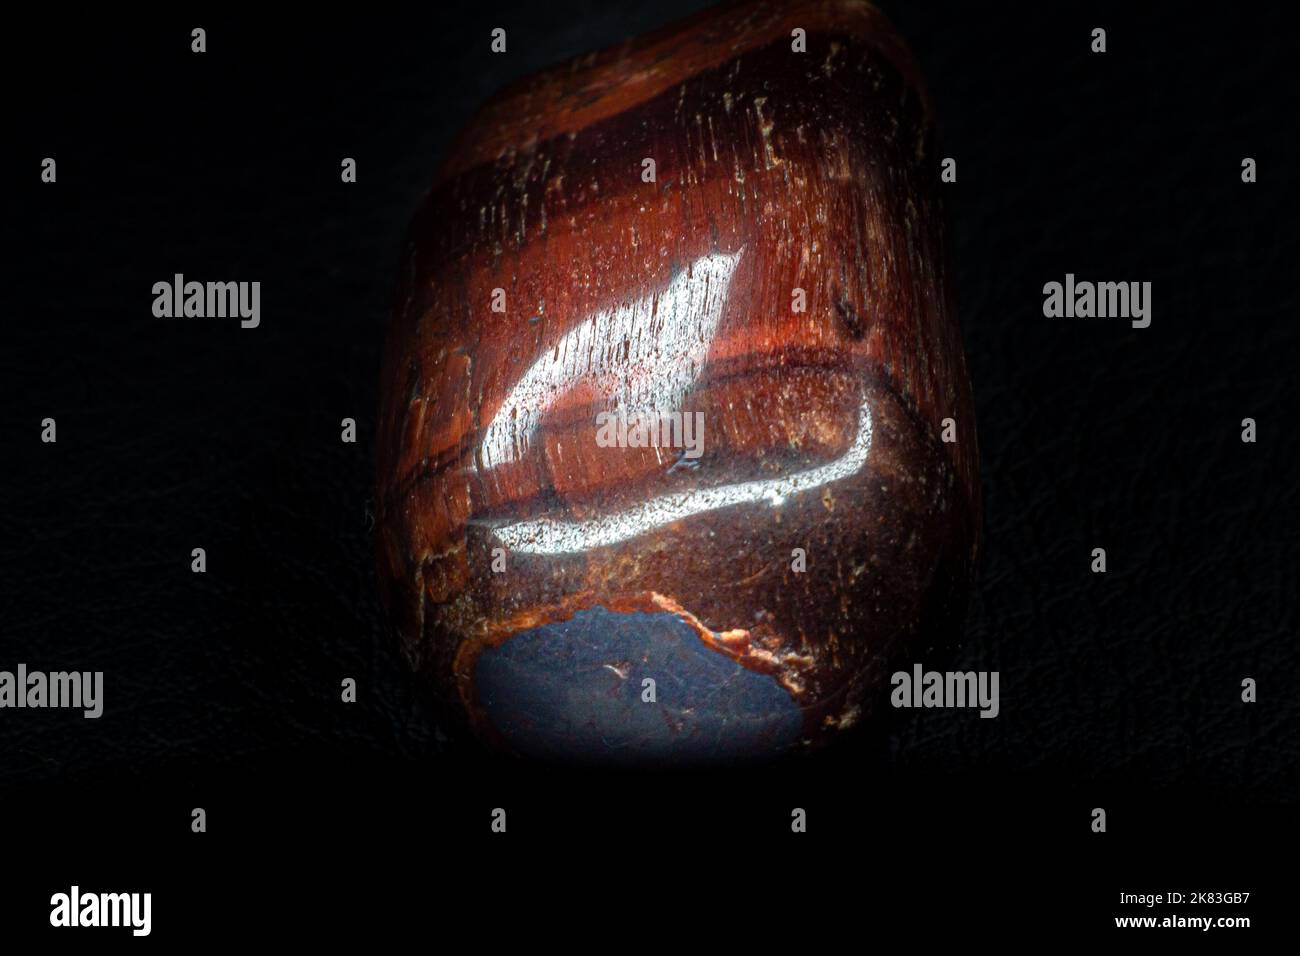 https://c8.alamy.com/comp/2K83GB7/brown-and-red-tigers-eye-dragons-eye-tumbled-rock-crystal-smooth-and-shiny-isolated-on-a-black-background-surface-copy-space-2K83GB7.jpg